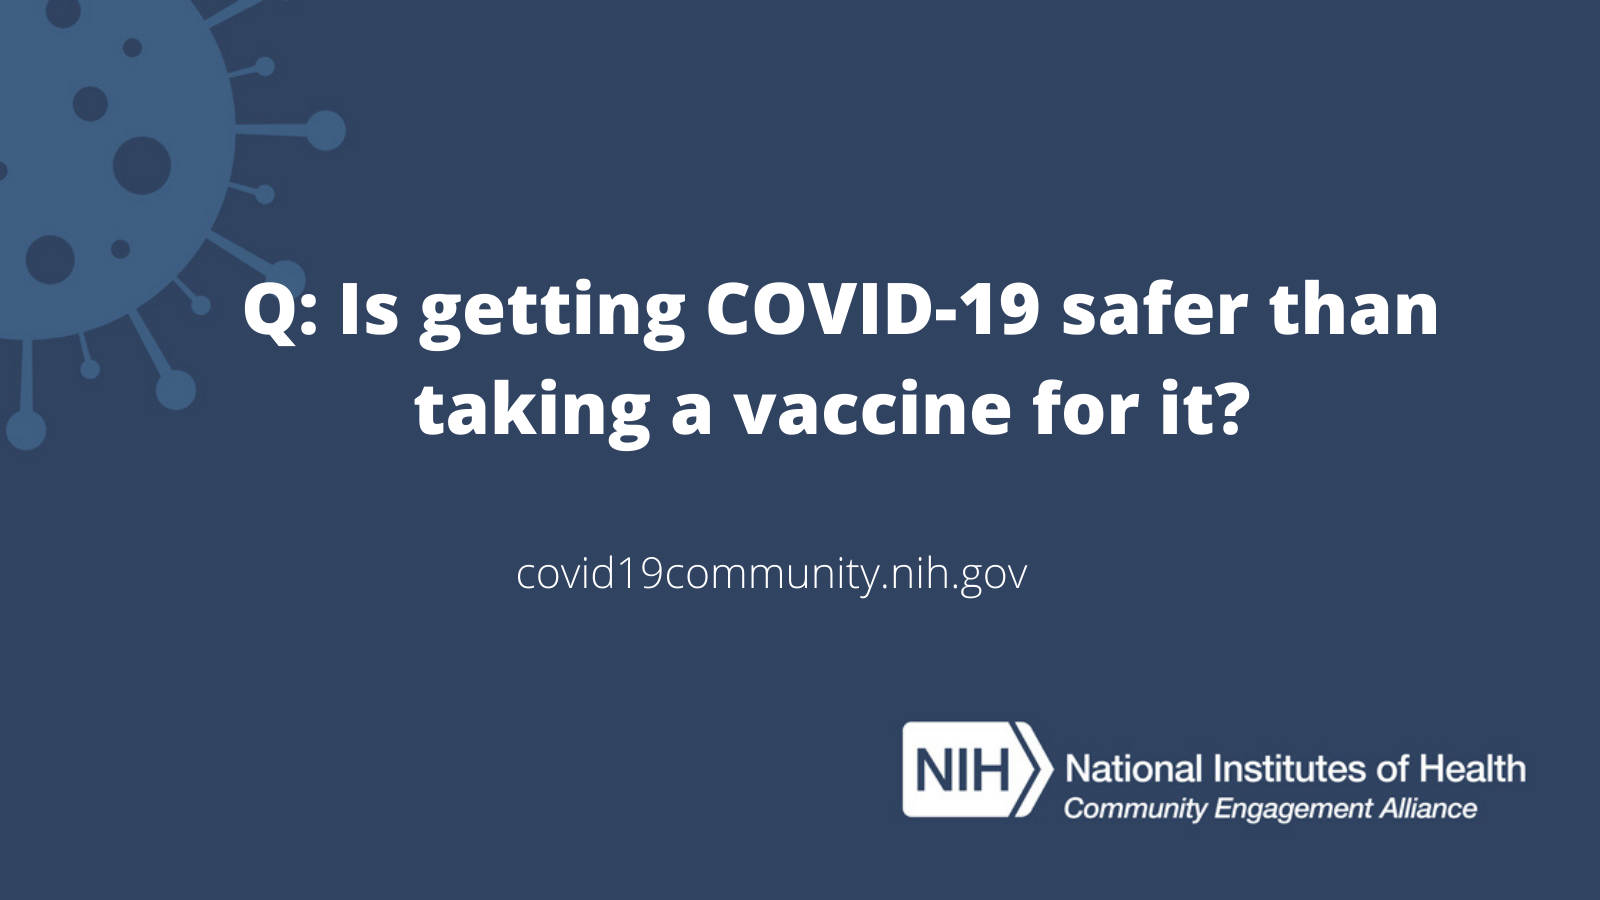 Text reads: Q: Is getting COVID-19 safer than taking a vaccine for it?"